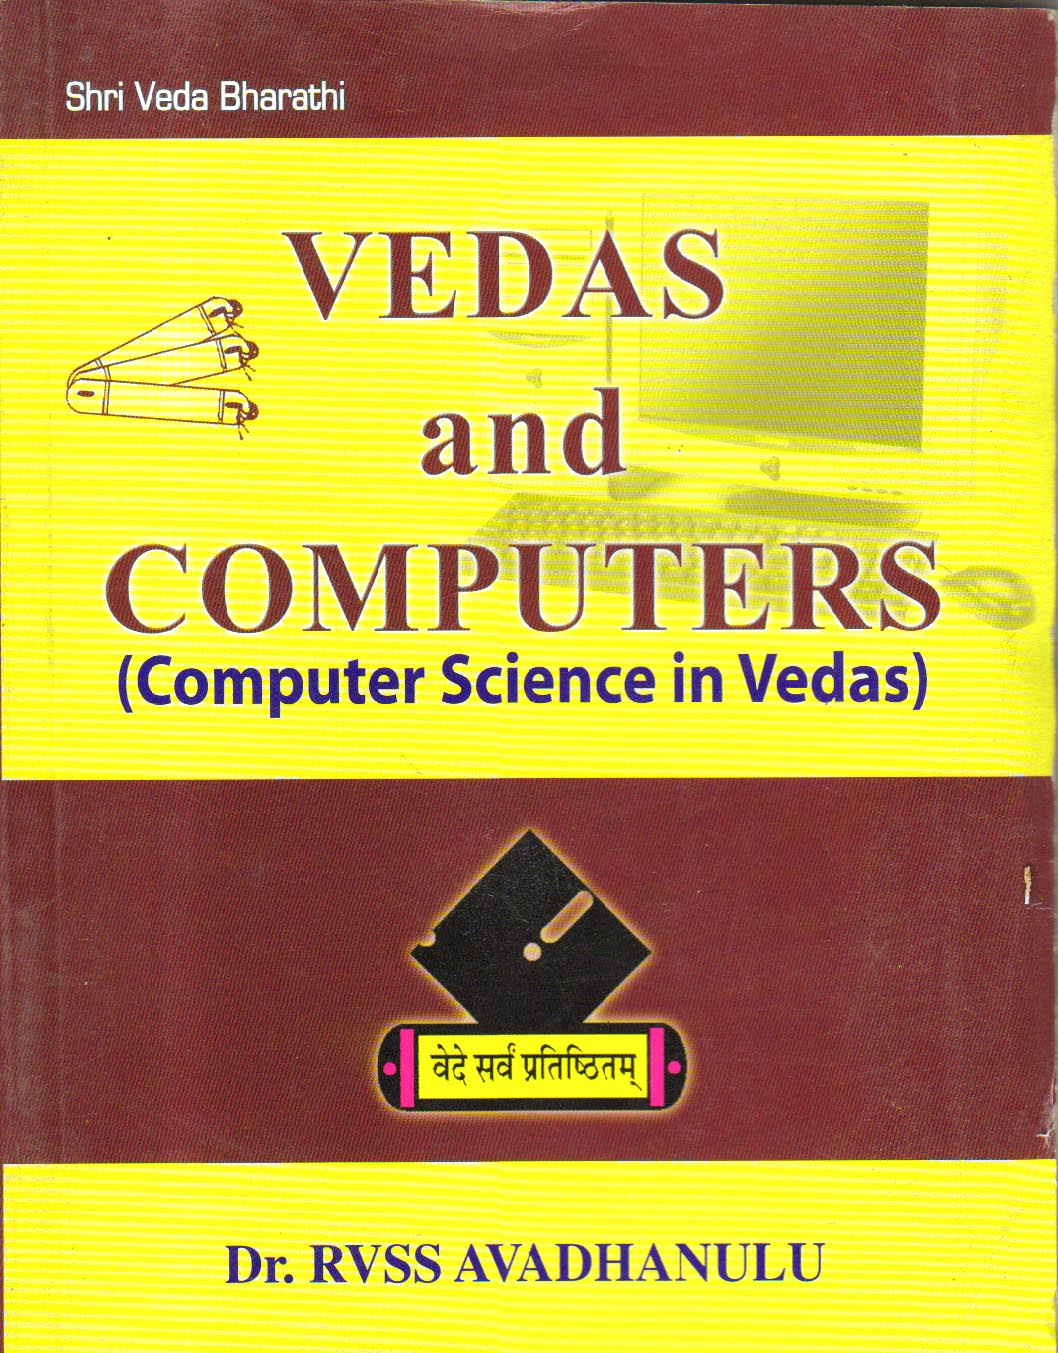 Vedas and Computer.